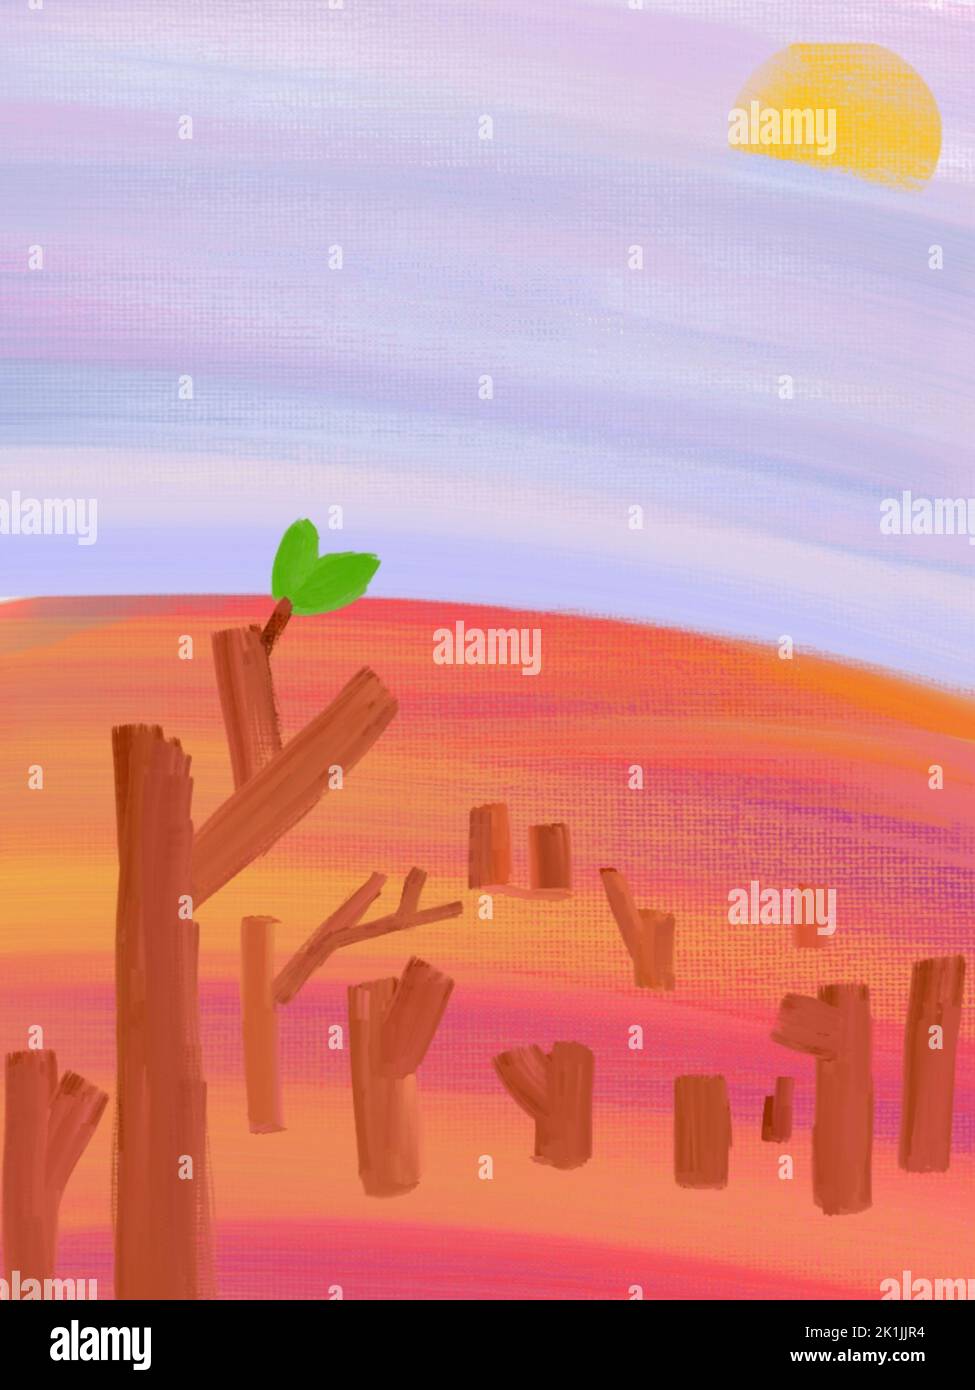 Desertification and Sprout of New Life Illustration/Kunst | Entwaldung Kunst | Desertification Digital Illustration || 1owlartist Stockfoto